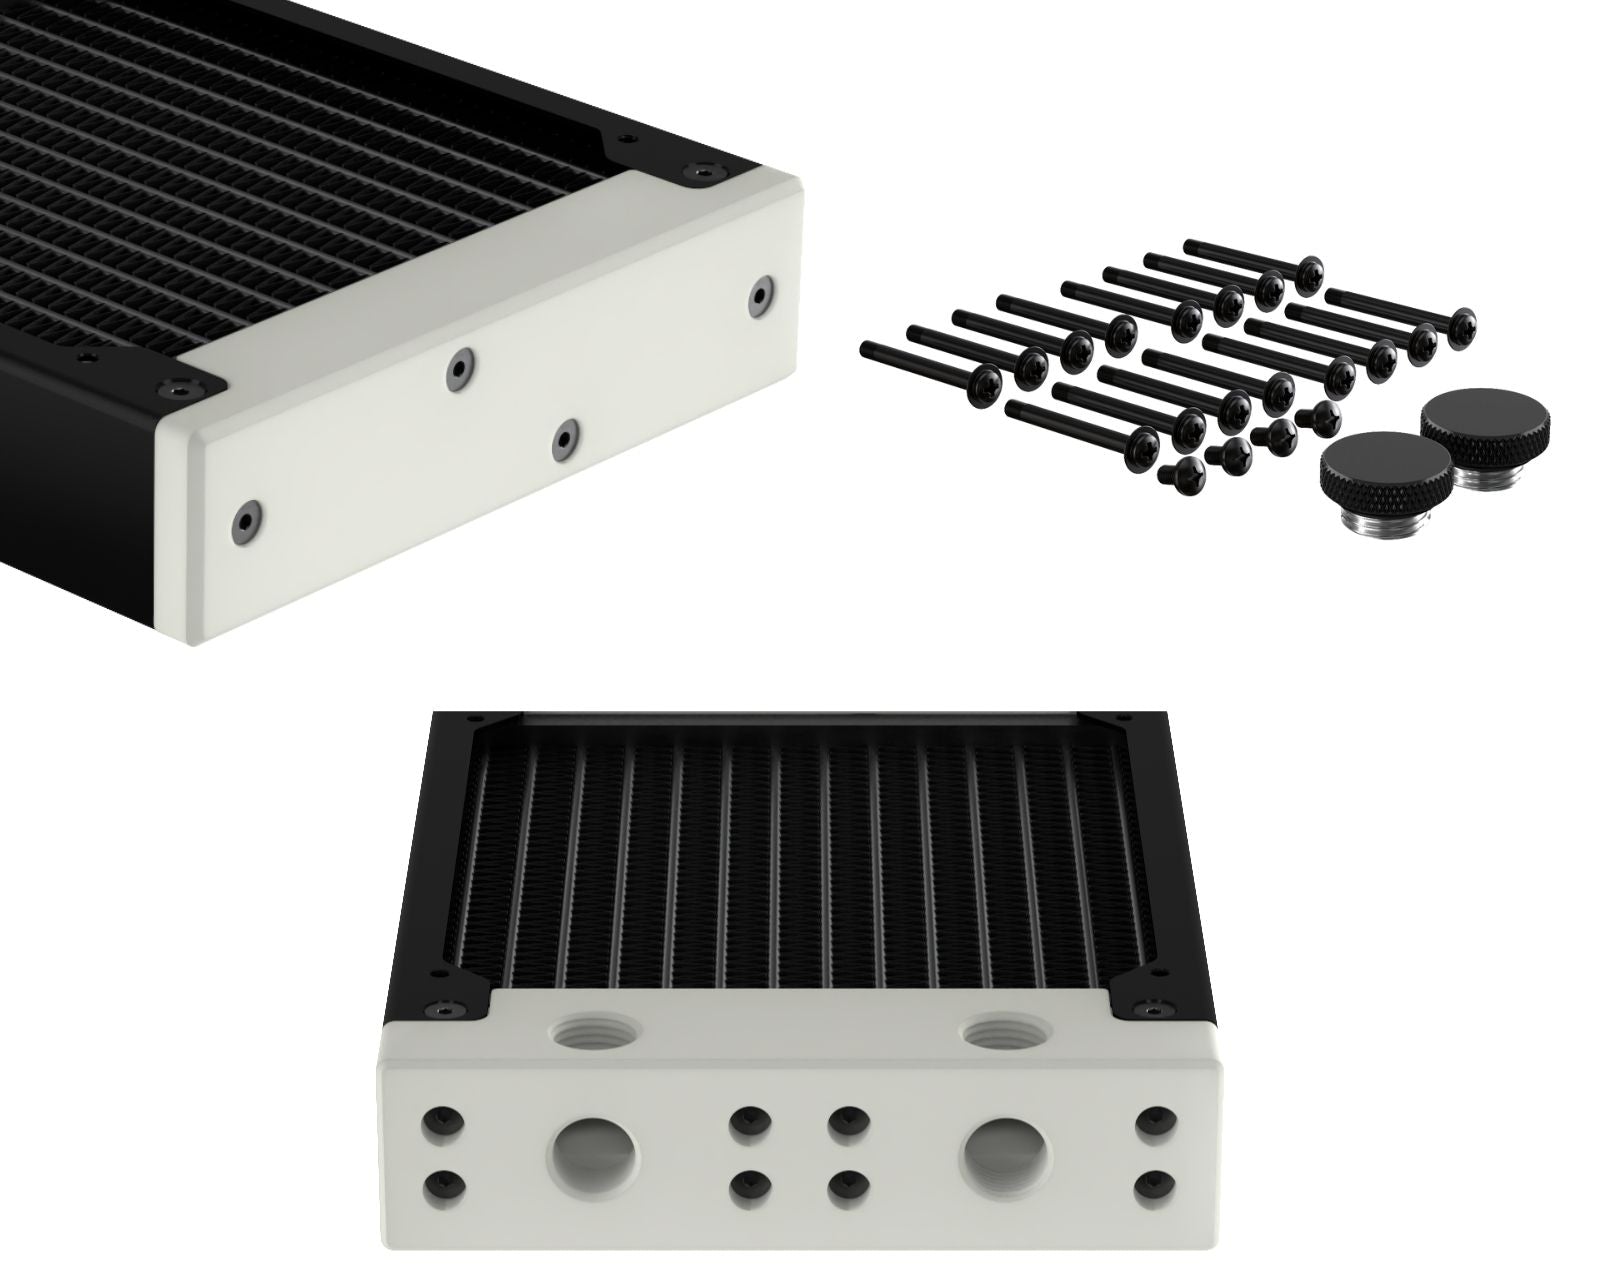 PrimoChill 480SL (30mm) EXIMO Modular Radiator, White POM, 4x120mm, Quad Fan (R-SL-W48) Available in 20+ Colors, Assembled in USA and Custom Watercooling Loop Ready - Satin Black